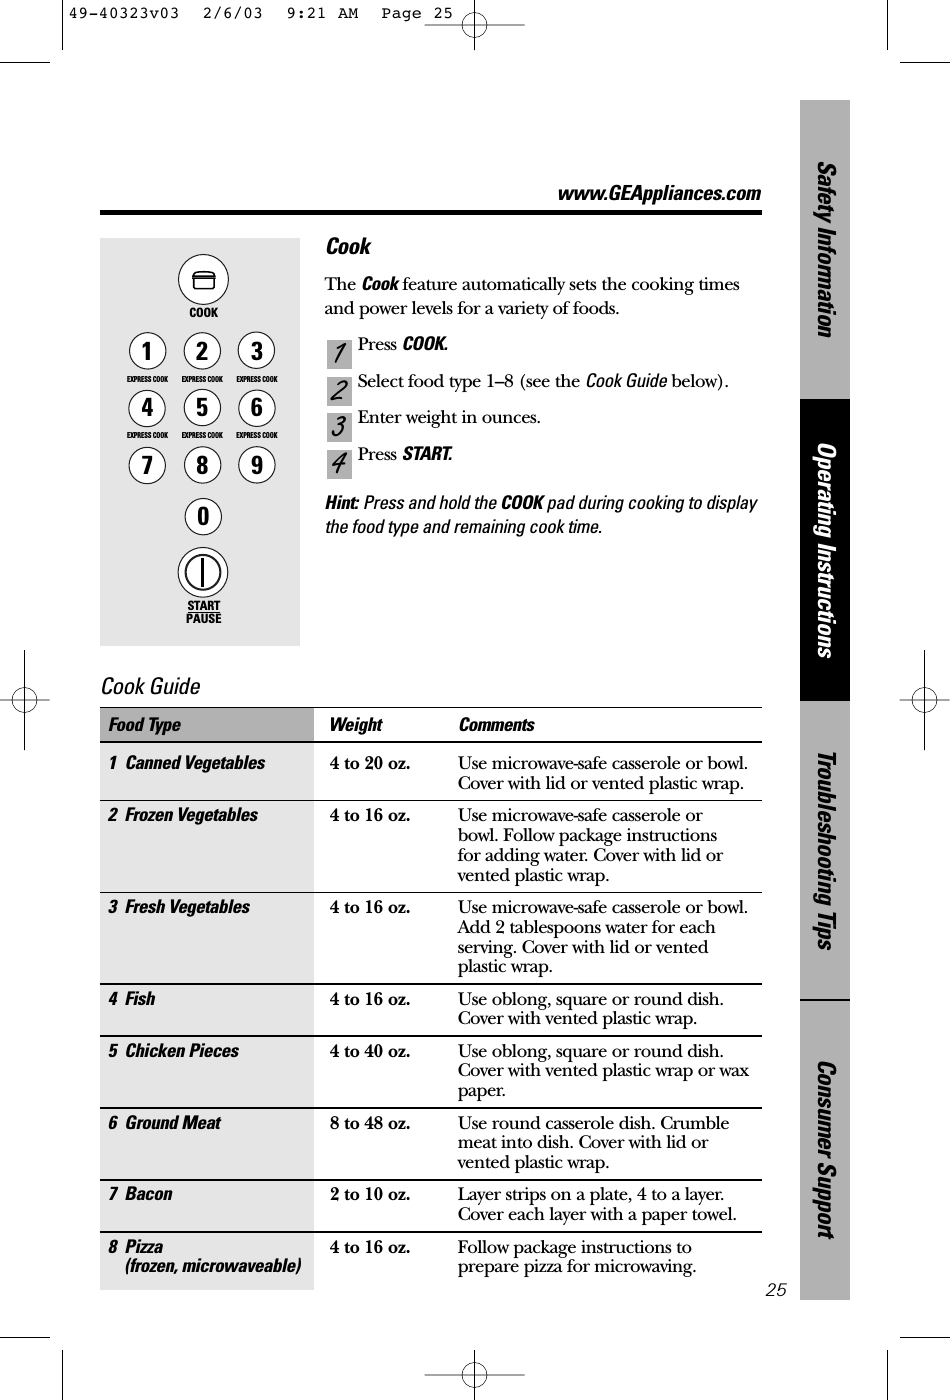 www.GEAppliances.comConsumer SupportTroubleshooting TipsOperating InstructionsSafety InformationCookThe Cook feature automatically sets the cooking timesand power levels for a variety of foods.Press COOK.Select food type 1–8 (see the Cook Guide below).Enter weight in ounces.Press START.Hint: Press and hold the COOK pad during cooking to displaythe food type and remaining cook time.43211 Canned Vegetables 4 to 20 oz. Use microwave-safe casserole or bowl. Cover with lid or vented plastic wrap.2 Frozen Vegetables 4 to 16 oz. Use microwave-safe casserole or bowl. Follow package instructions for adding water. Cover with lid or vented plastic wrap.3 Fresh Vegetables 4 to 16 oz. Use microwave-safe casserole or bowl. Add 2 tablespoons water for eachserving. Cover with lid or vented plastic wrap.4 Fish 4 to 16 oz. Use oblong, square or round dish.Cover with vented plastic wrap.5 Chicken Pieces 4 to 40 oz. Use oblong, square or round dish.Cover with vented plastic wrap or wax paper.6 Ground Meat 8 to 48 oz. Use round casserole dish. Crumble meat into dish. Cover with lid or vented plastic wrap.7 Bacon 2 to 10 oz. Layer strips on a plate, 4 to a layer.Cover each layer with a paper towel.8 Pizza 4 to 16 oz. Follow package instructions to (frozen, microwaveable) prepare pizza for microwaving.Food Type Weight CommentsSTARTPAUSE1EXPRESS COOK3EXPRESS COOK2EXPRESS COOK5EXPRESS COOK6EXPRESS COOK78904EXPRESS COOKCOOK25Cook Guide 49-40323v03  2/6/03  9:21 AM  Page 25